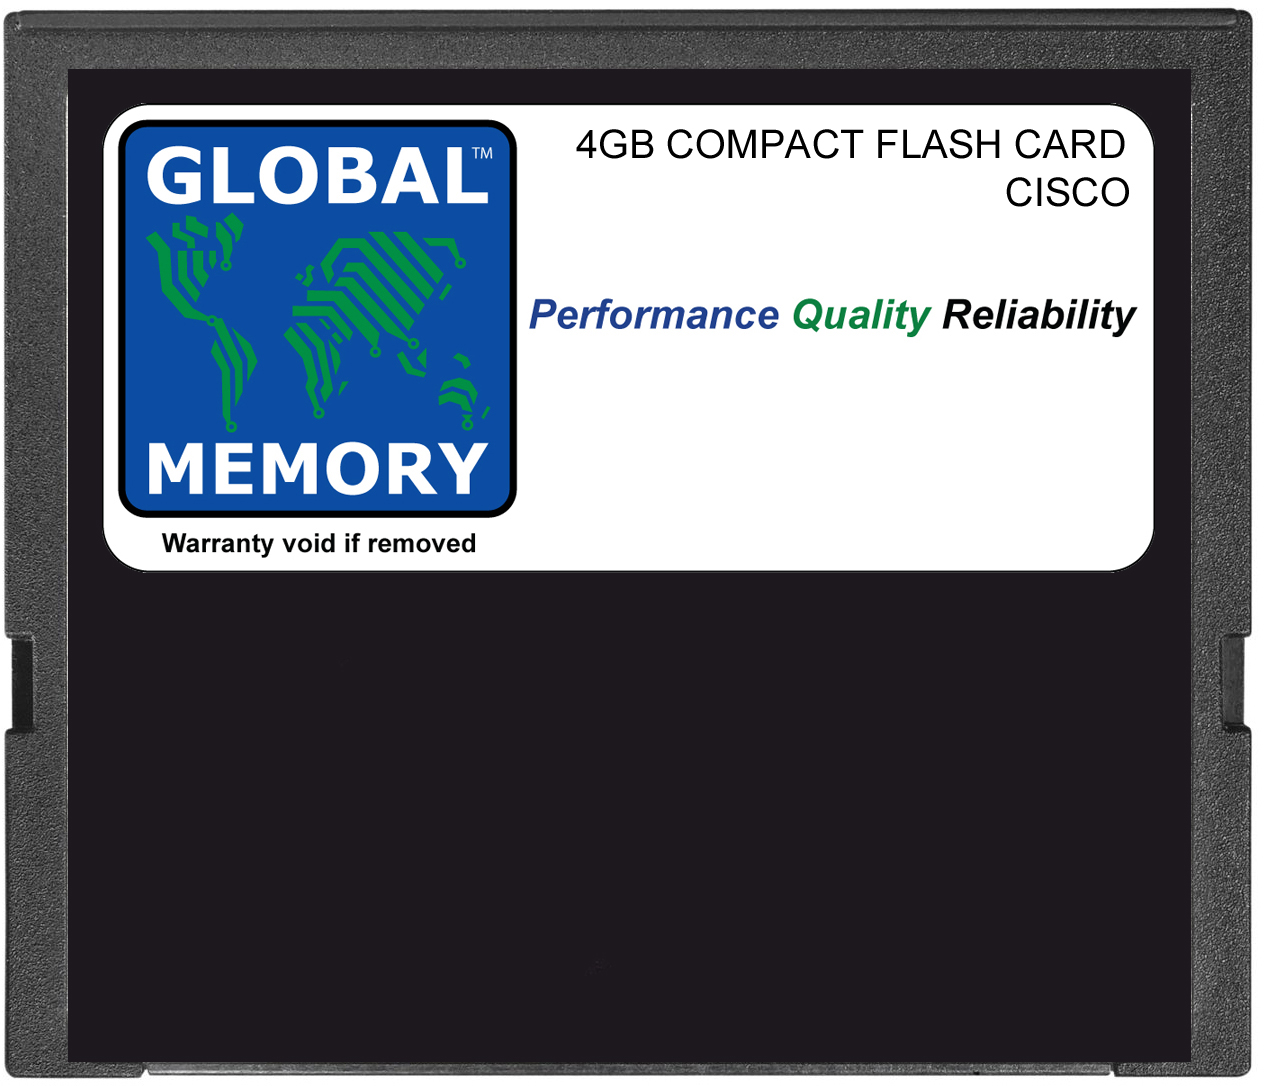 4GB COMPACT FLASH CARD MEMORY FOR CISCO 1900 / 2900 / 3900 SERIES ROUTERS (MEM-CF-4GB)